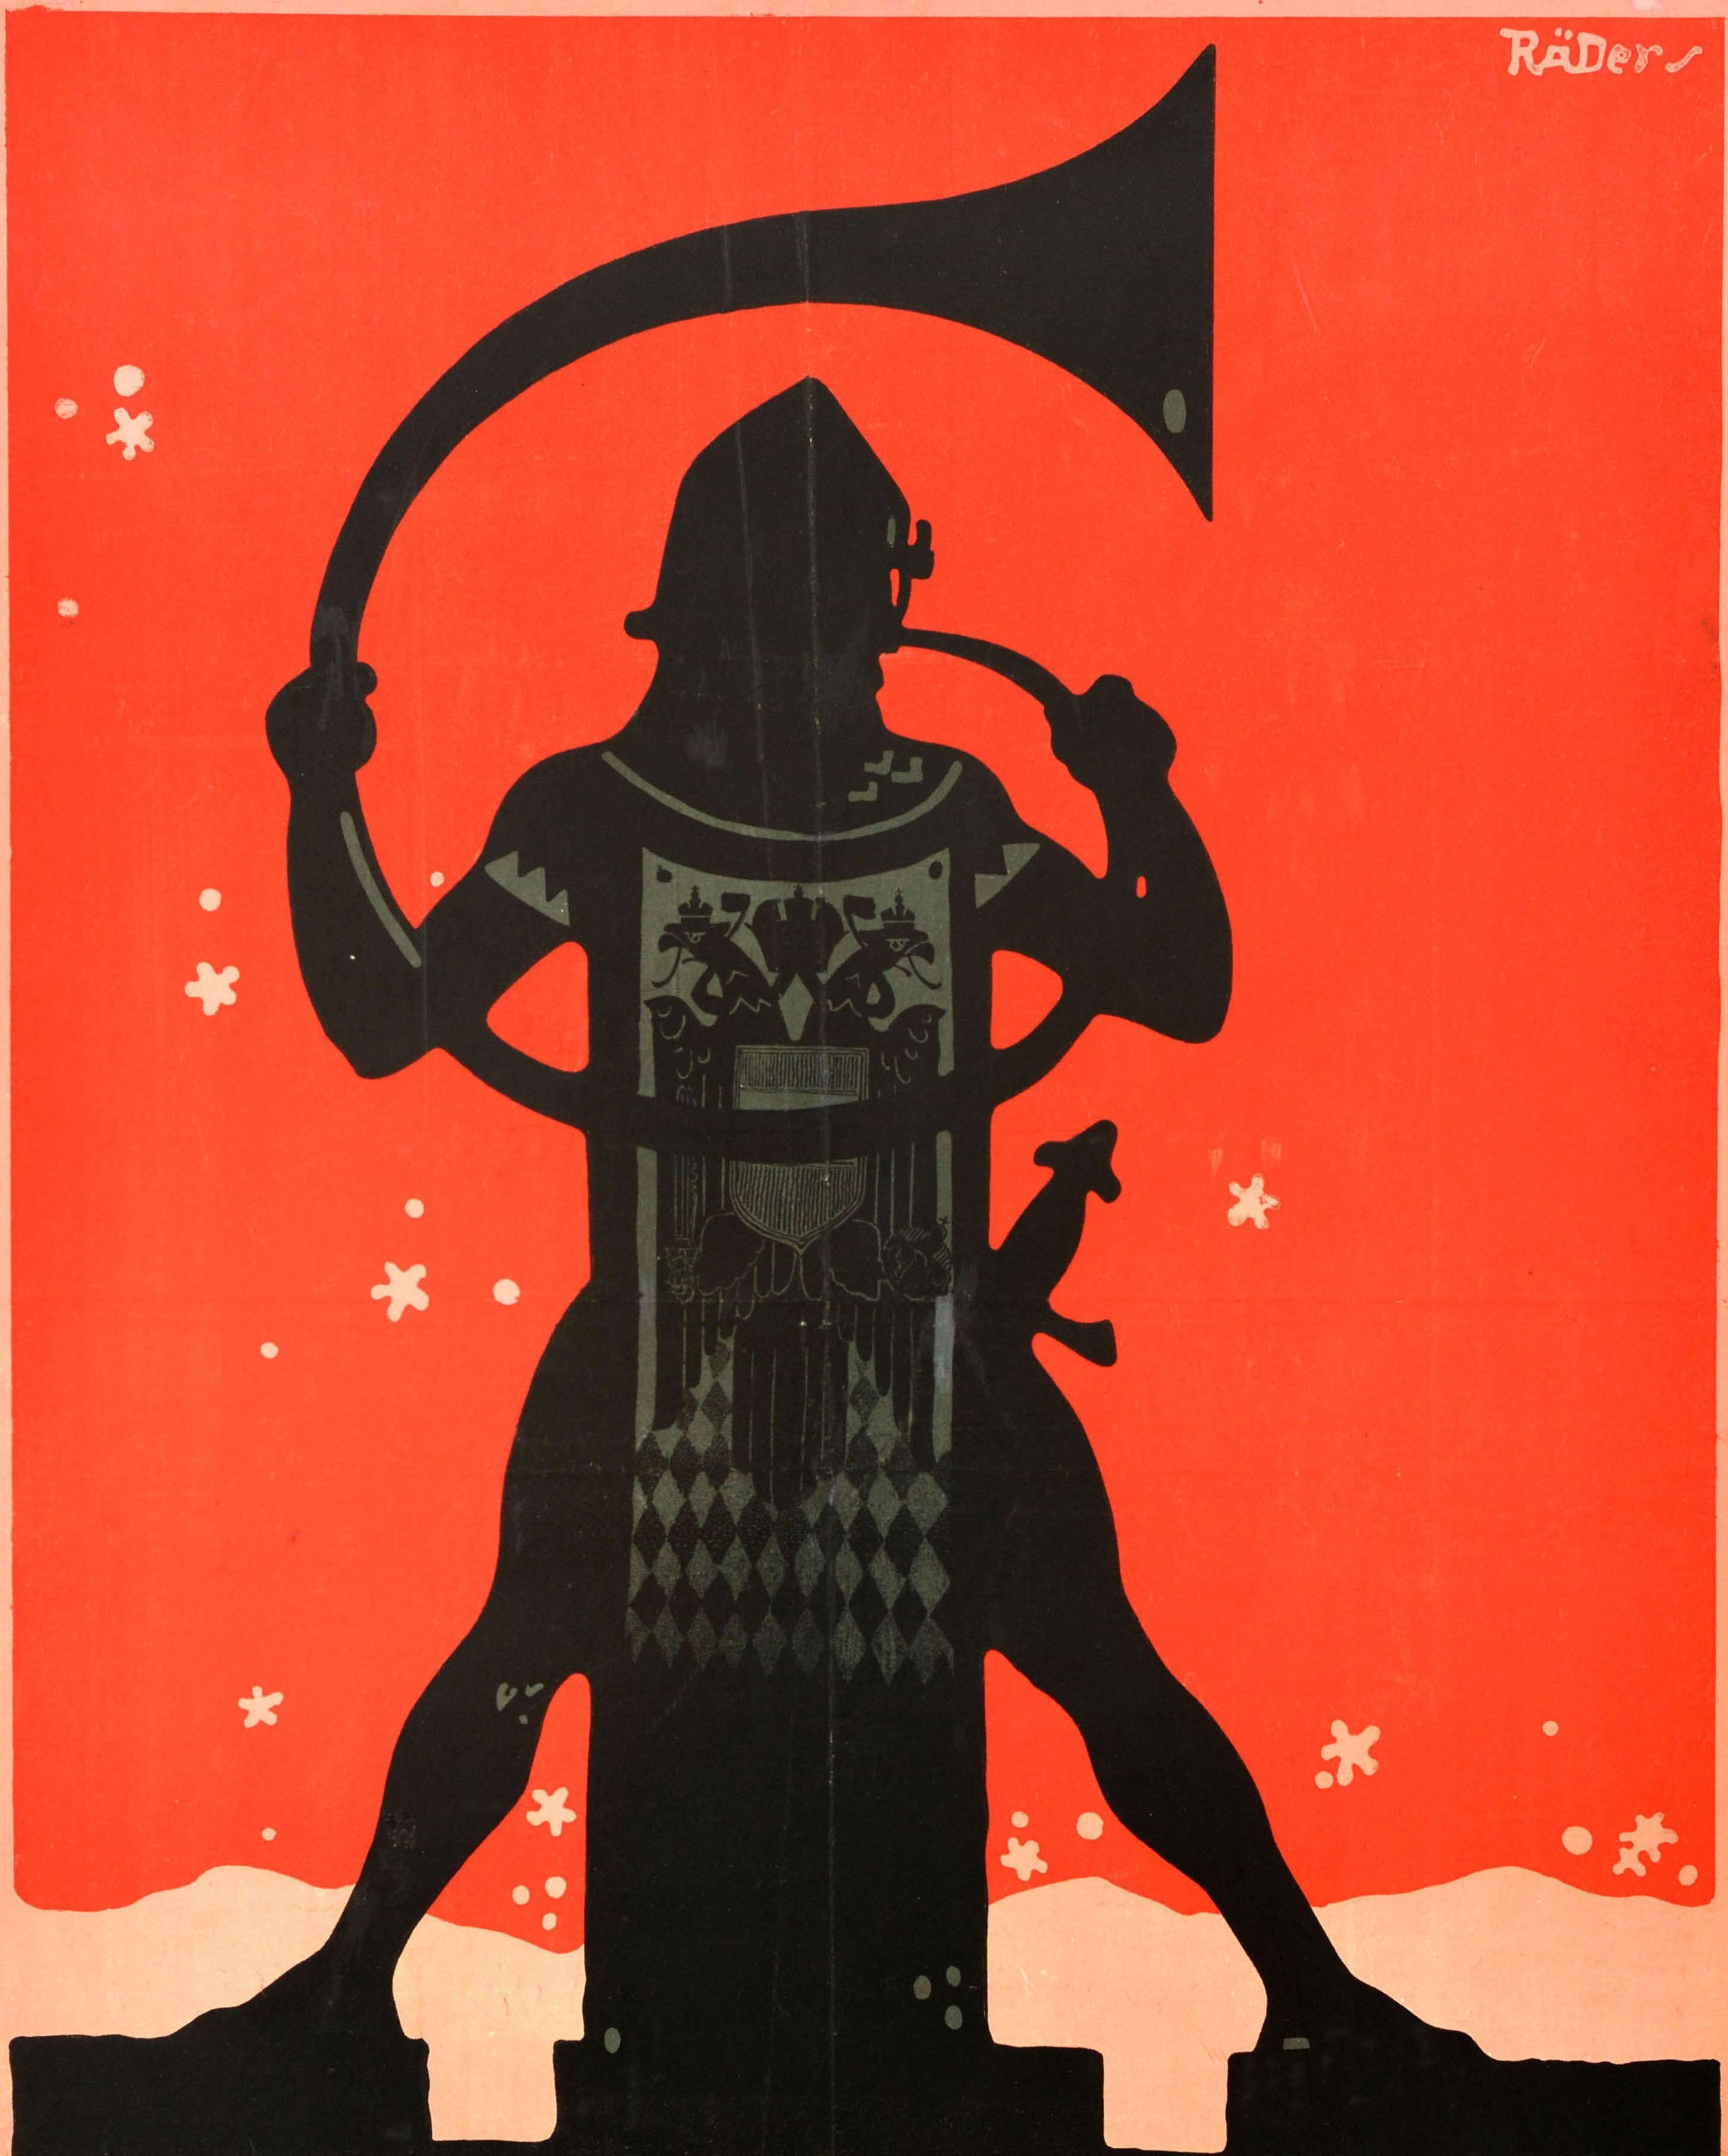 Original antique World War One war bond poster for the 7th Austrian War Loan draw / Zeichnet 7. Oesterr. Kriegsanleihe featuring a Silhouette of a soldier playing a Horn with snow falling on the red background, a sword on his side and the coat of